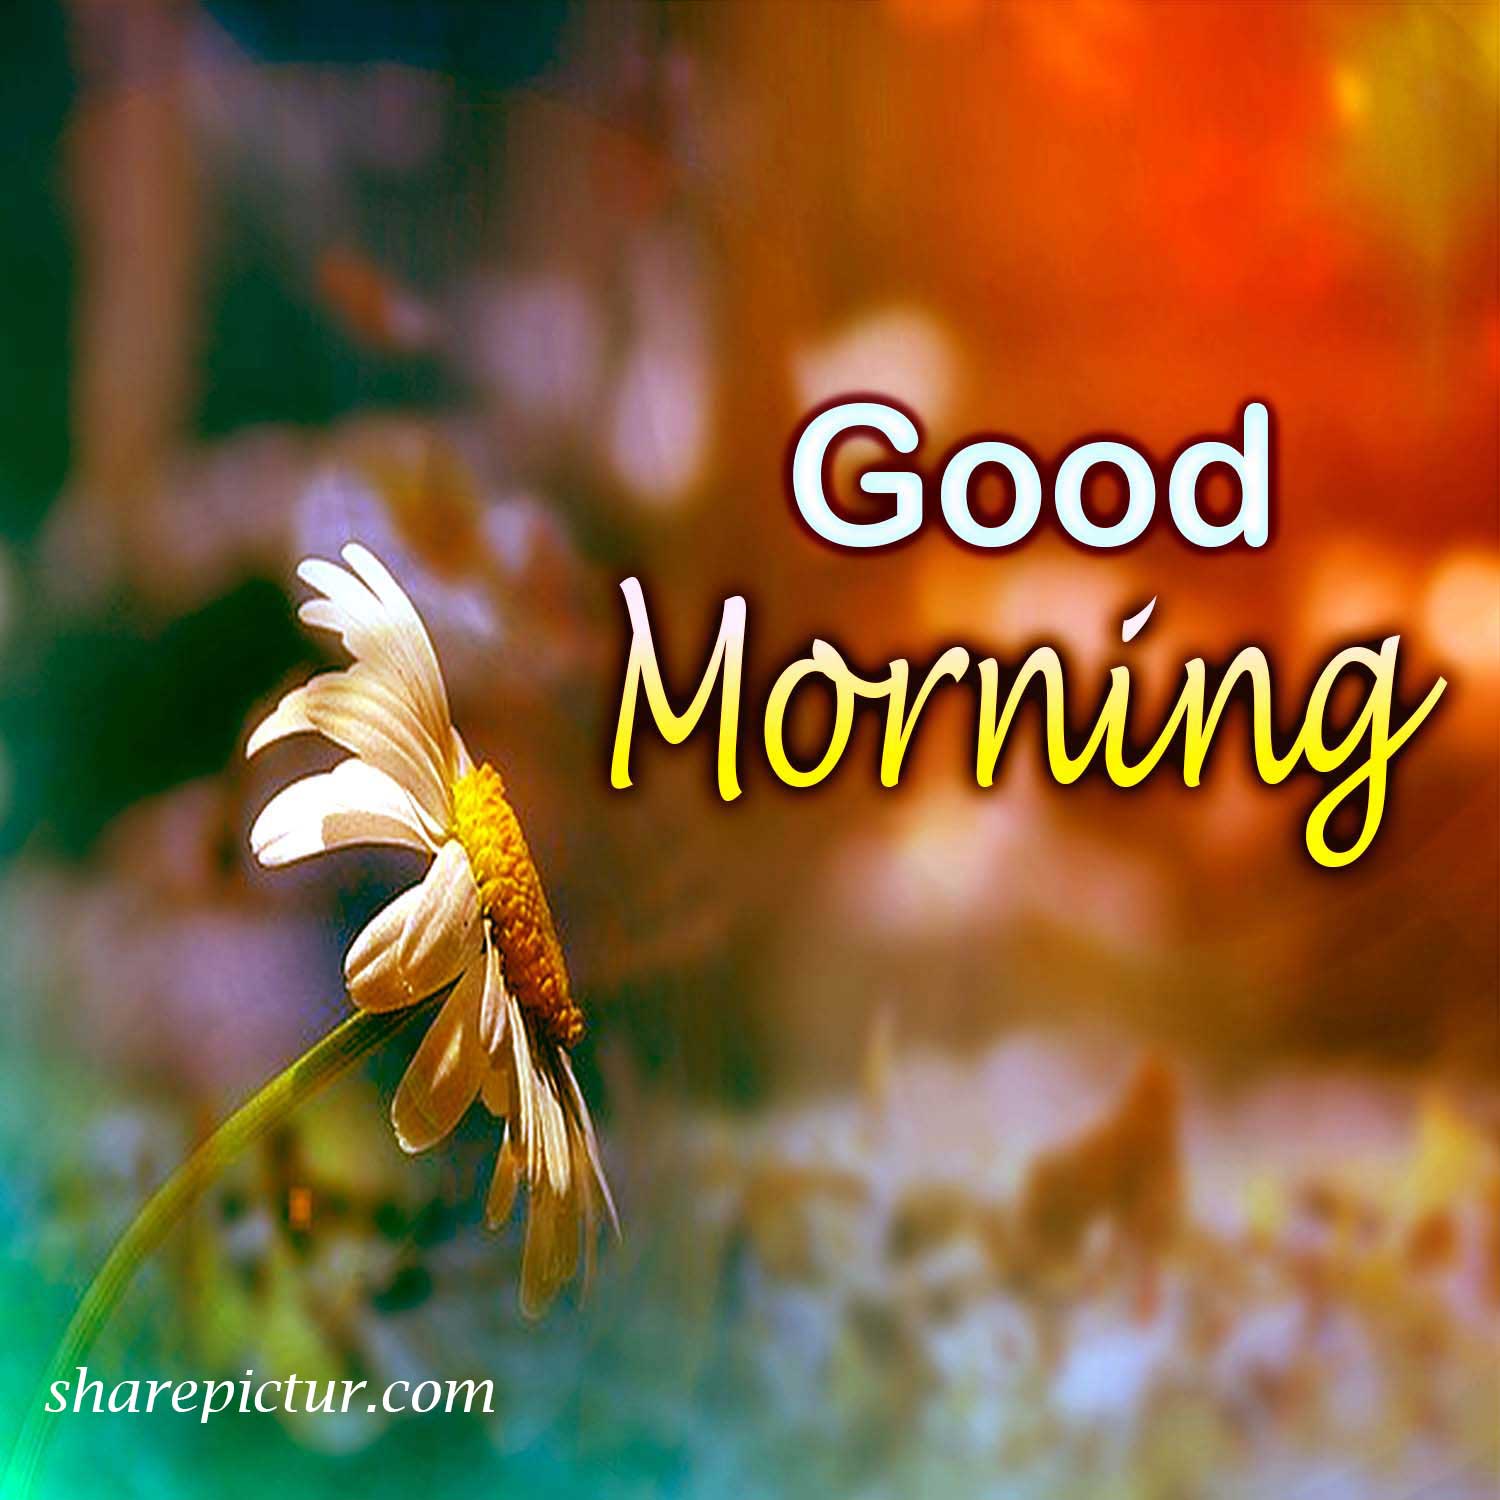 special good morning wishes